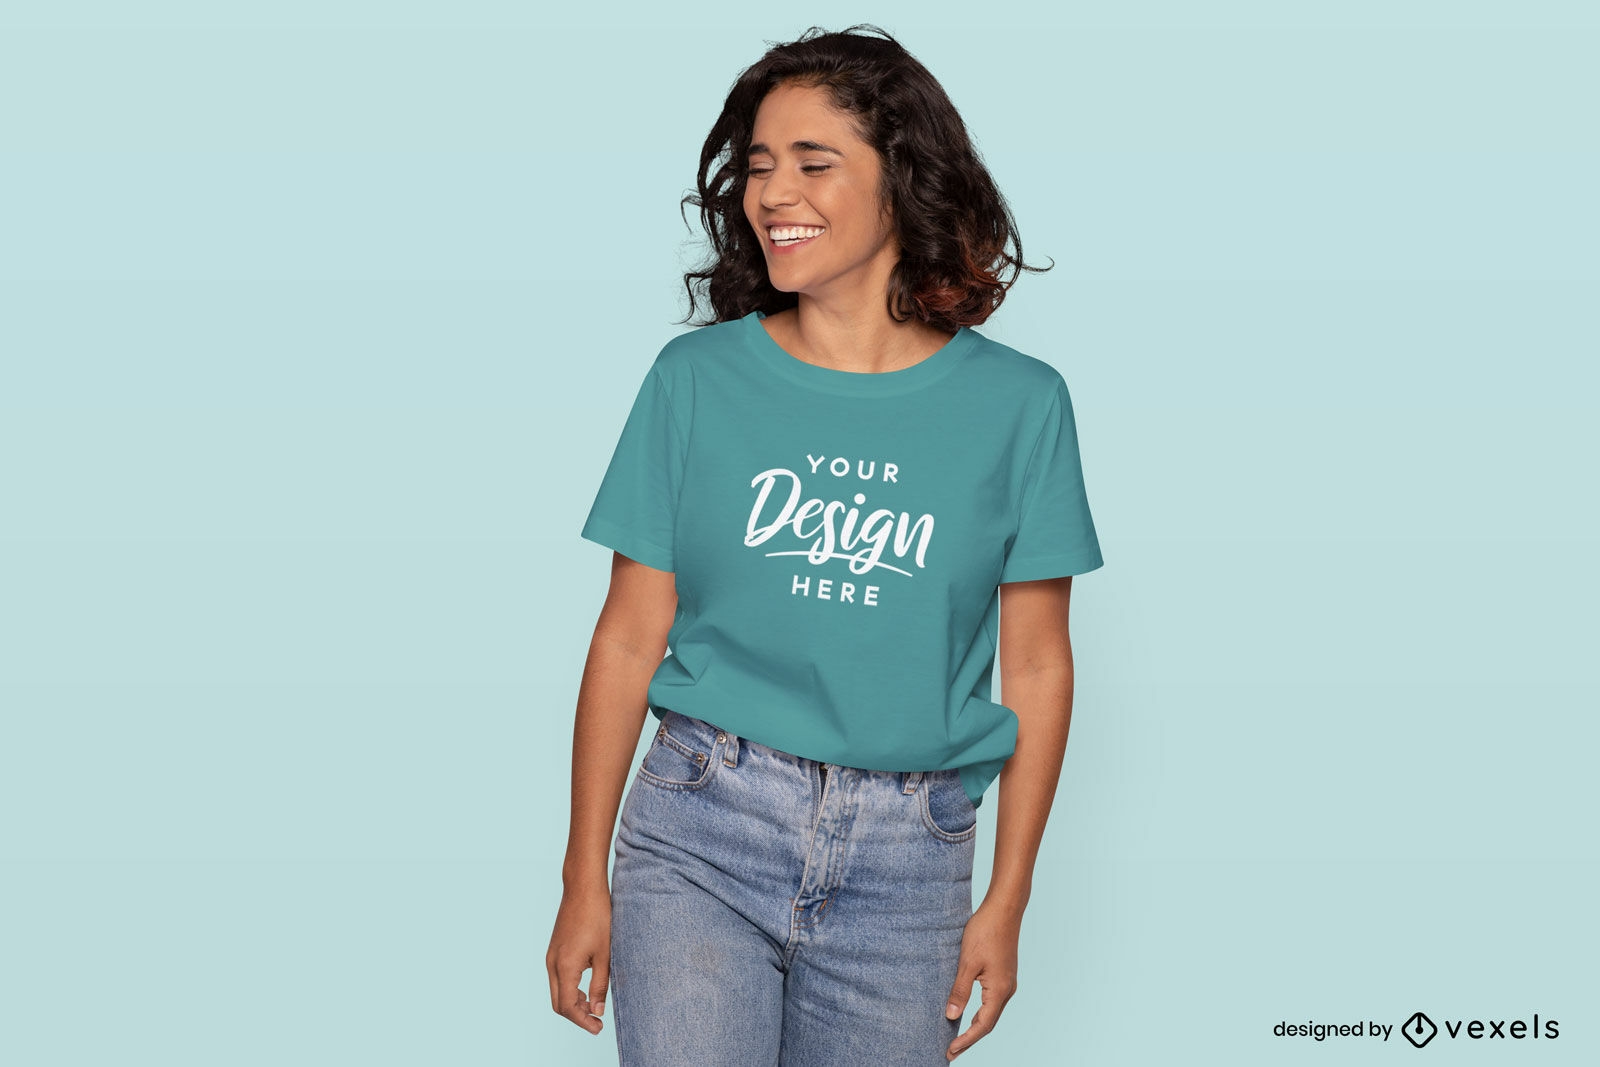 Discover more than 190 girl shirt design with jeans super hot